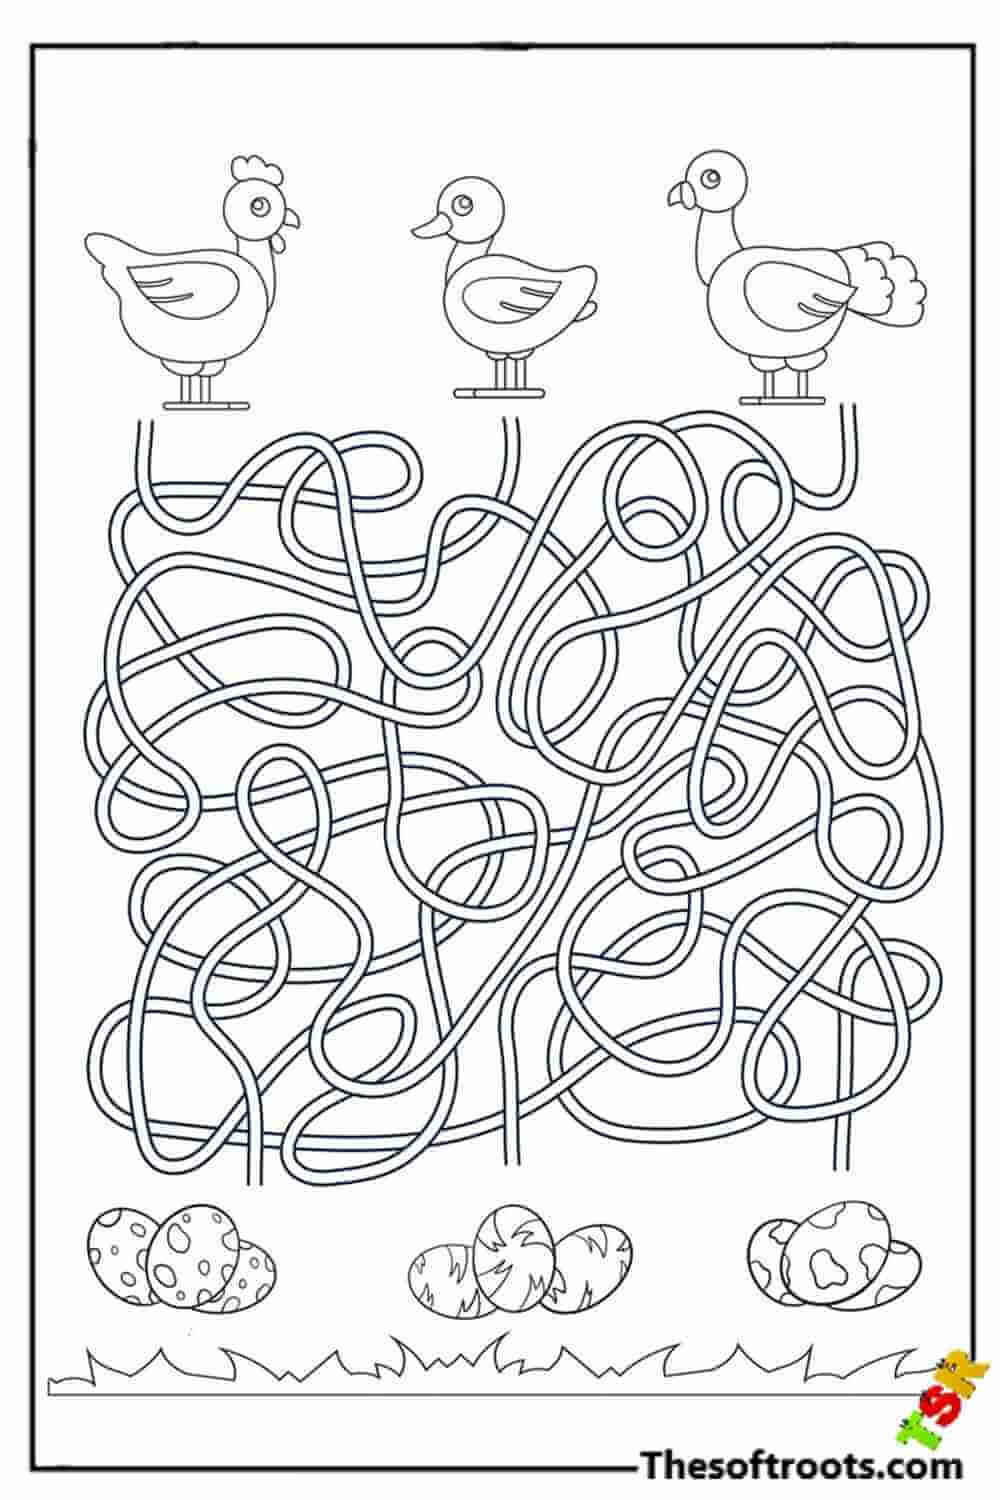 Turkey maze coloring pages